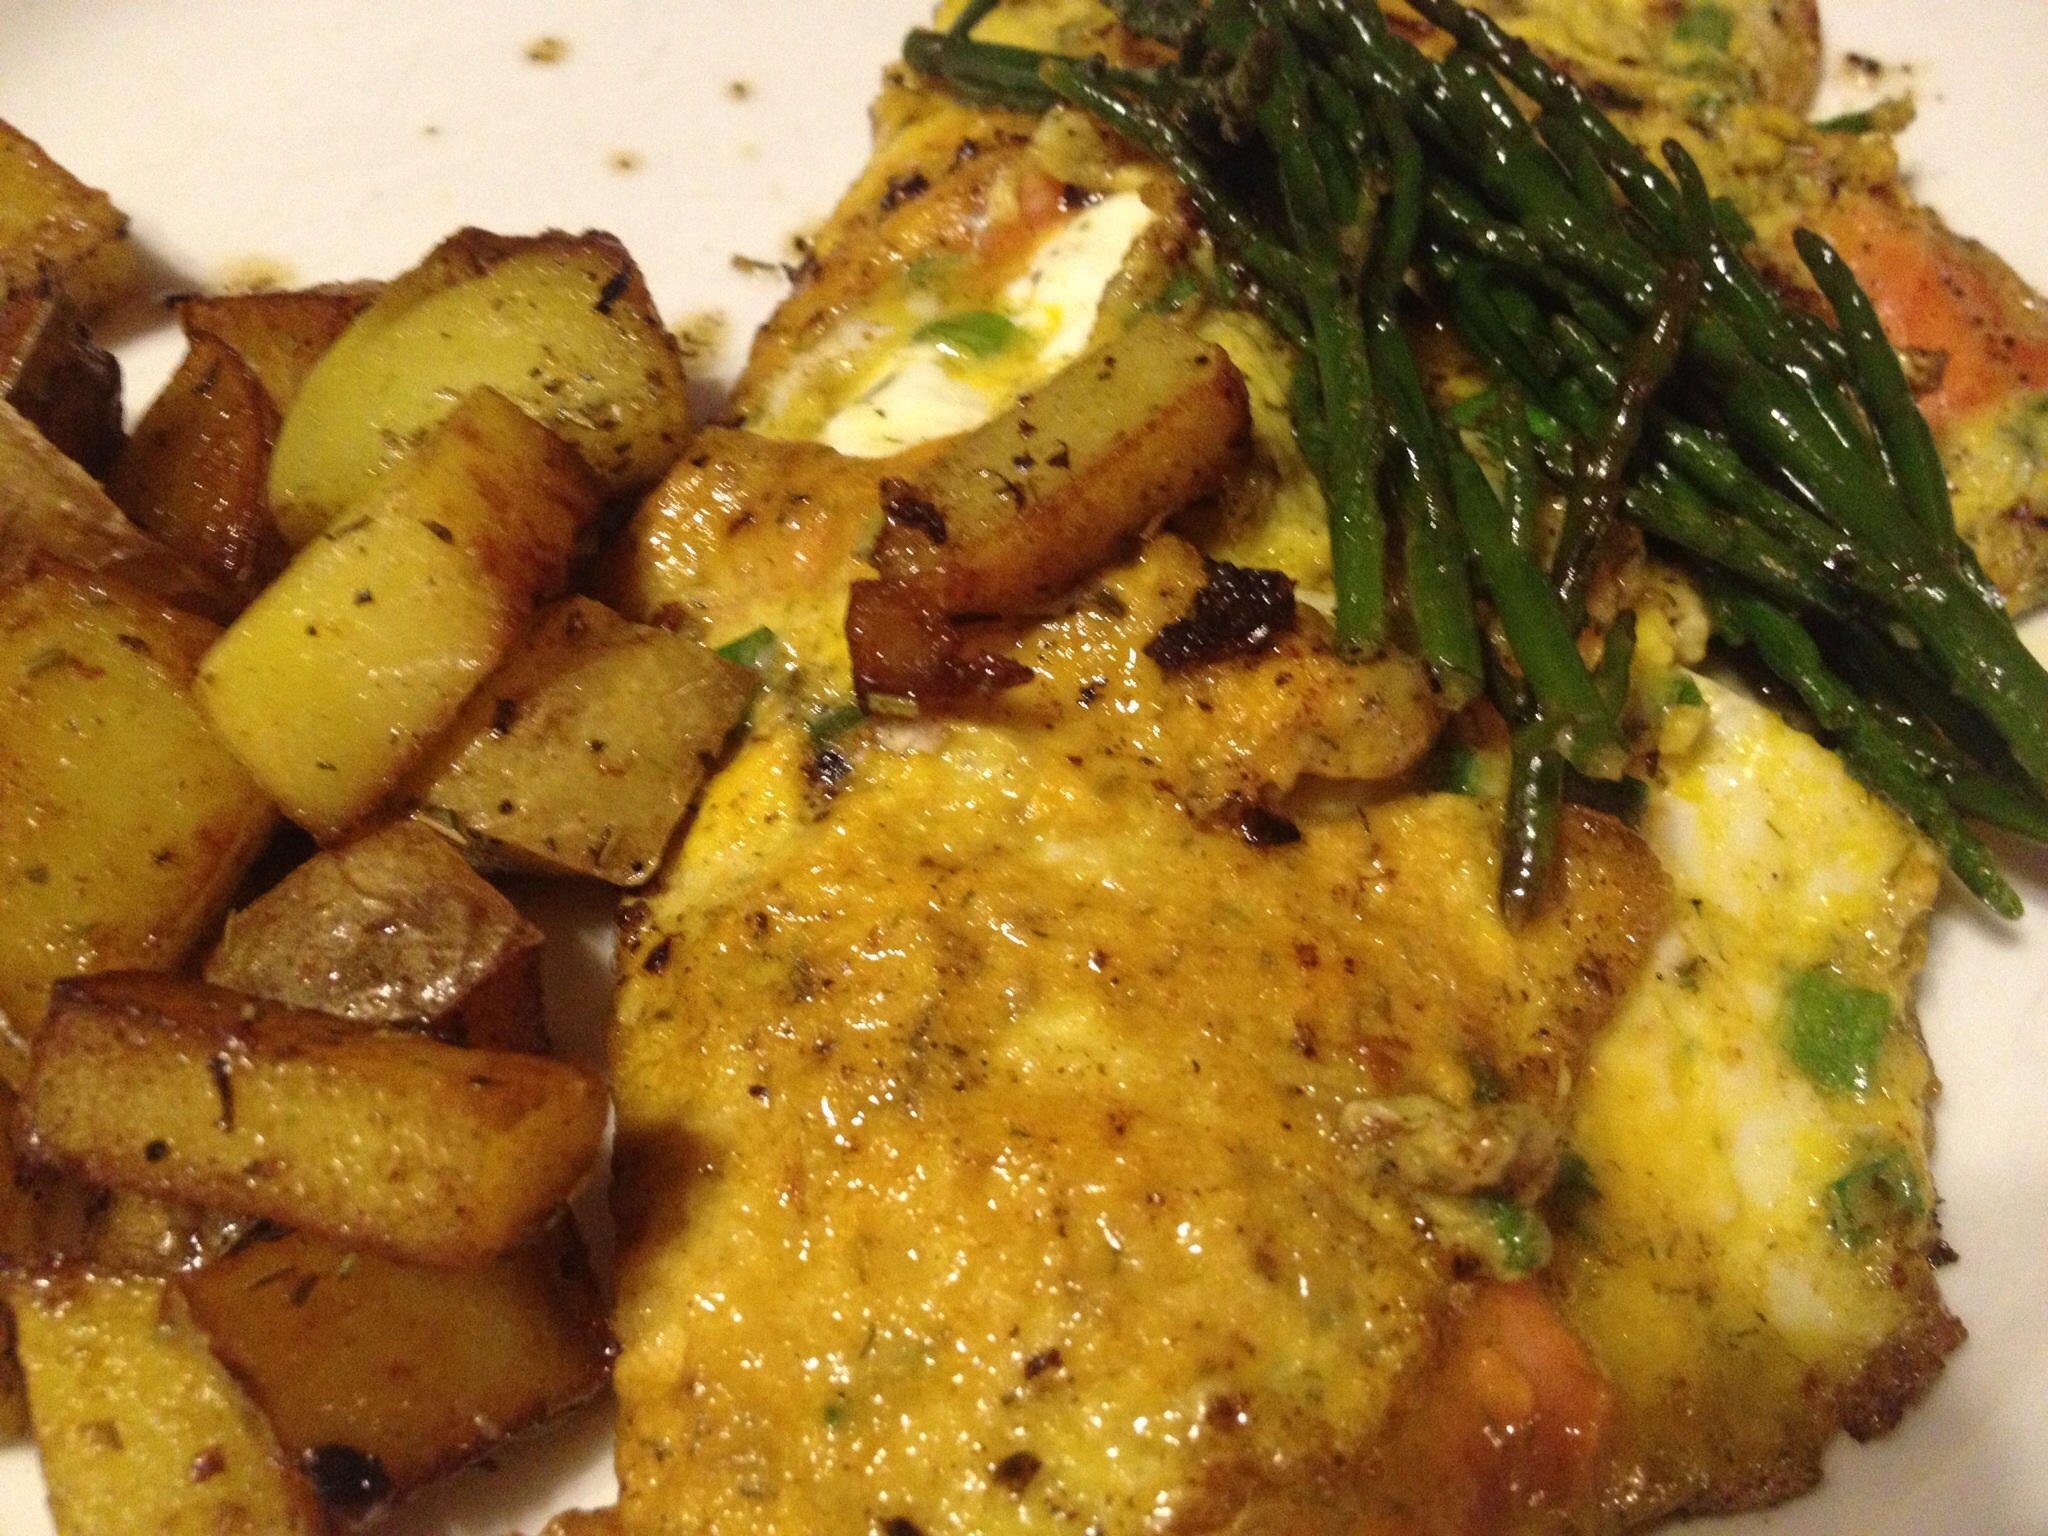 Lox Omelette with Salicornia